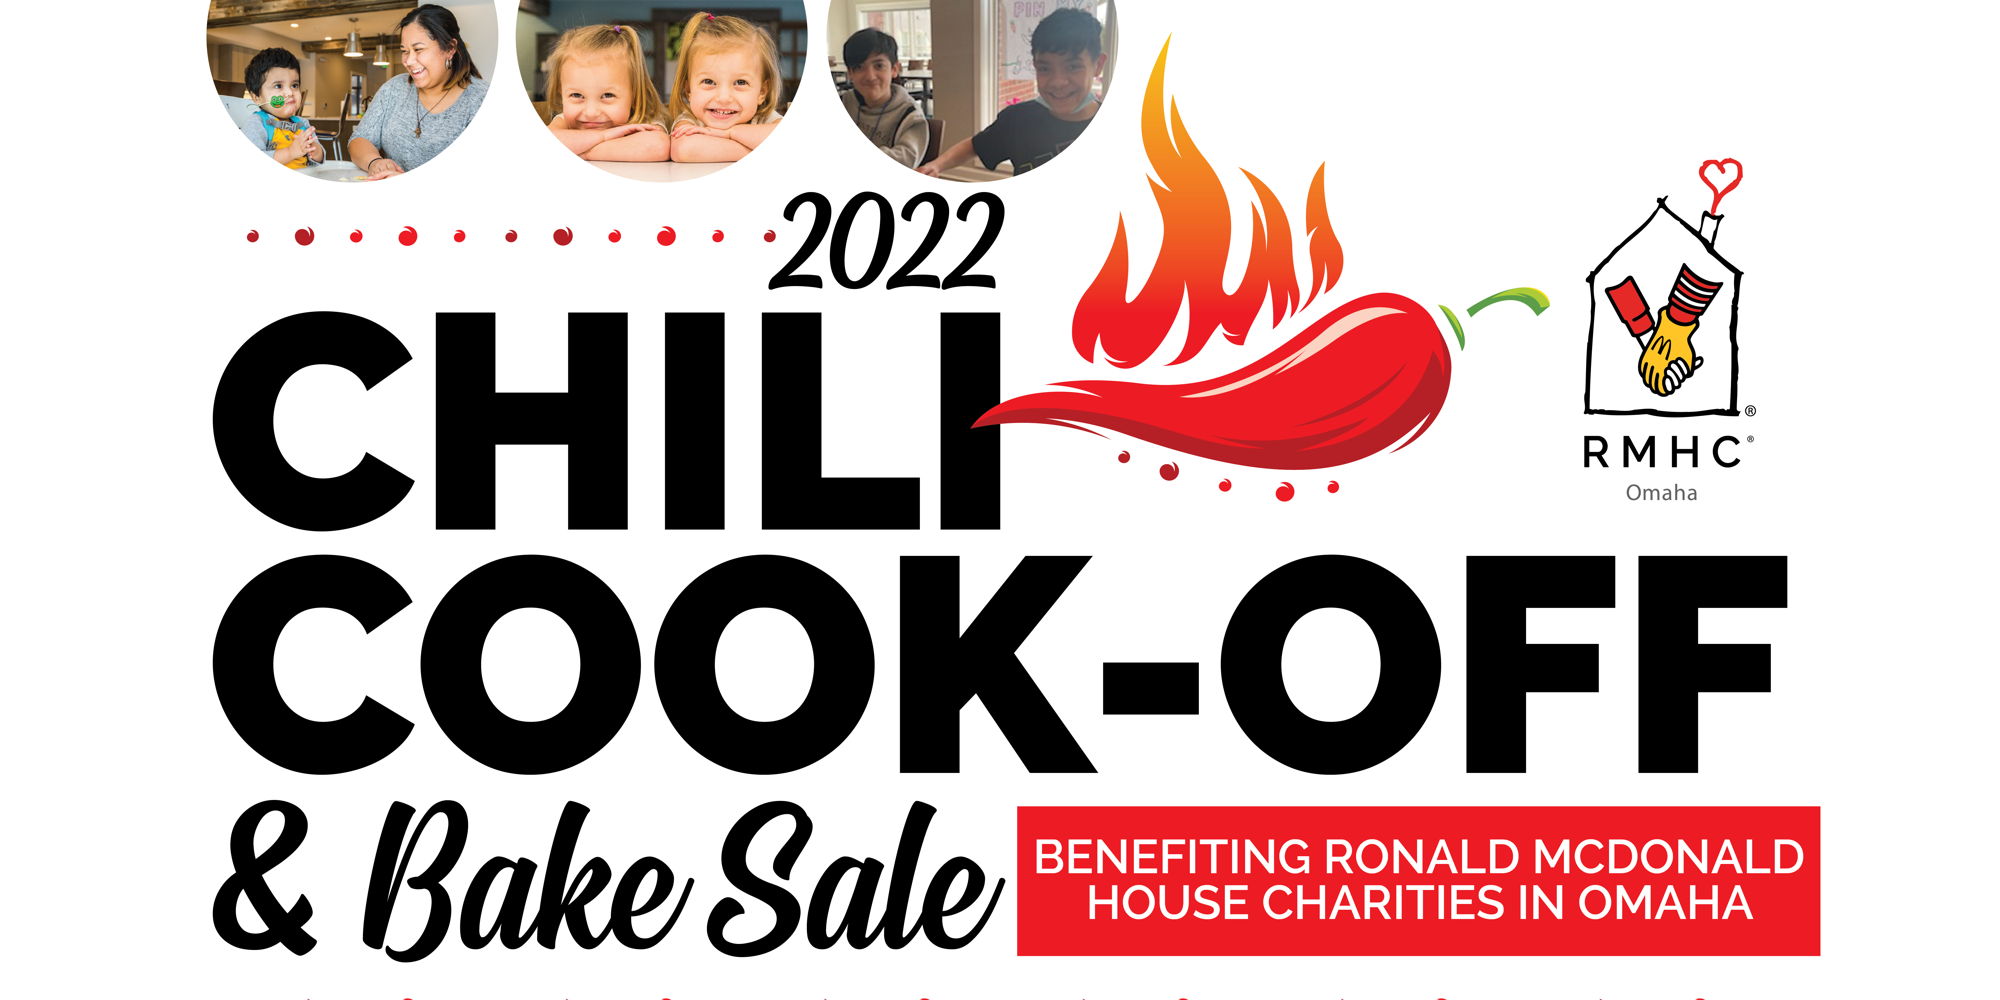 3rd Annual RMHC Chili Cook-Off promotional image